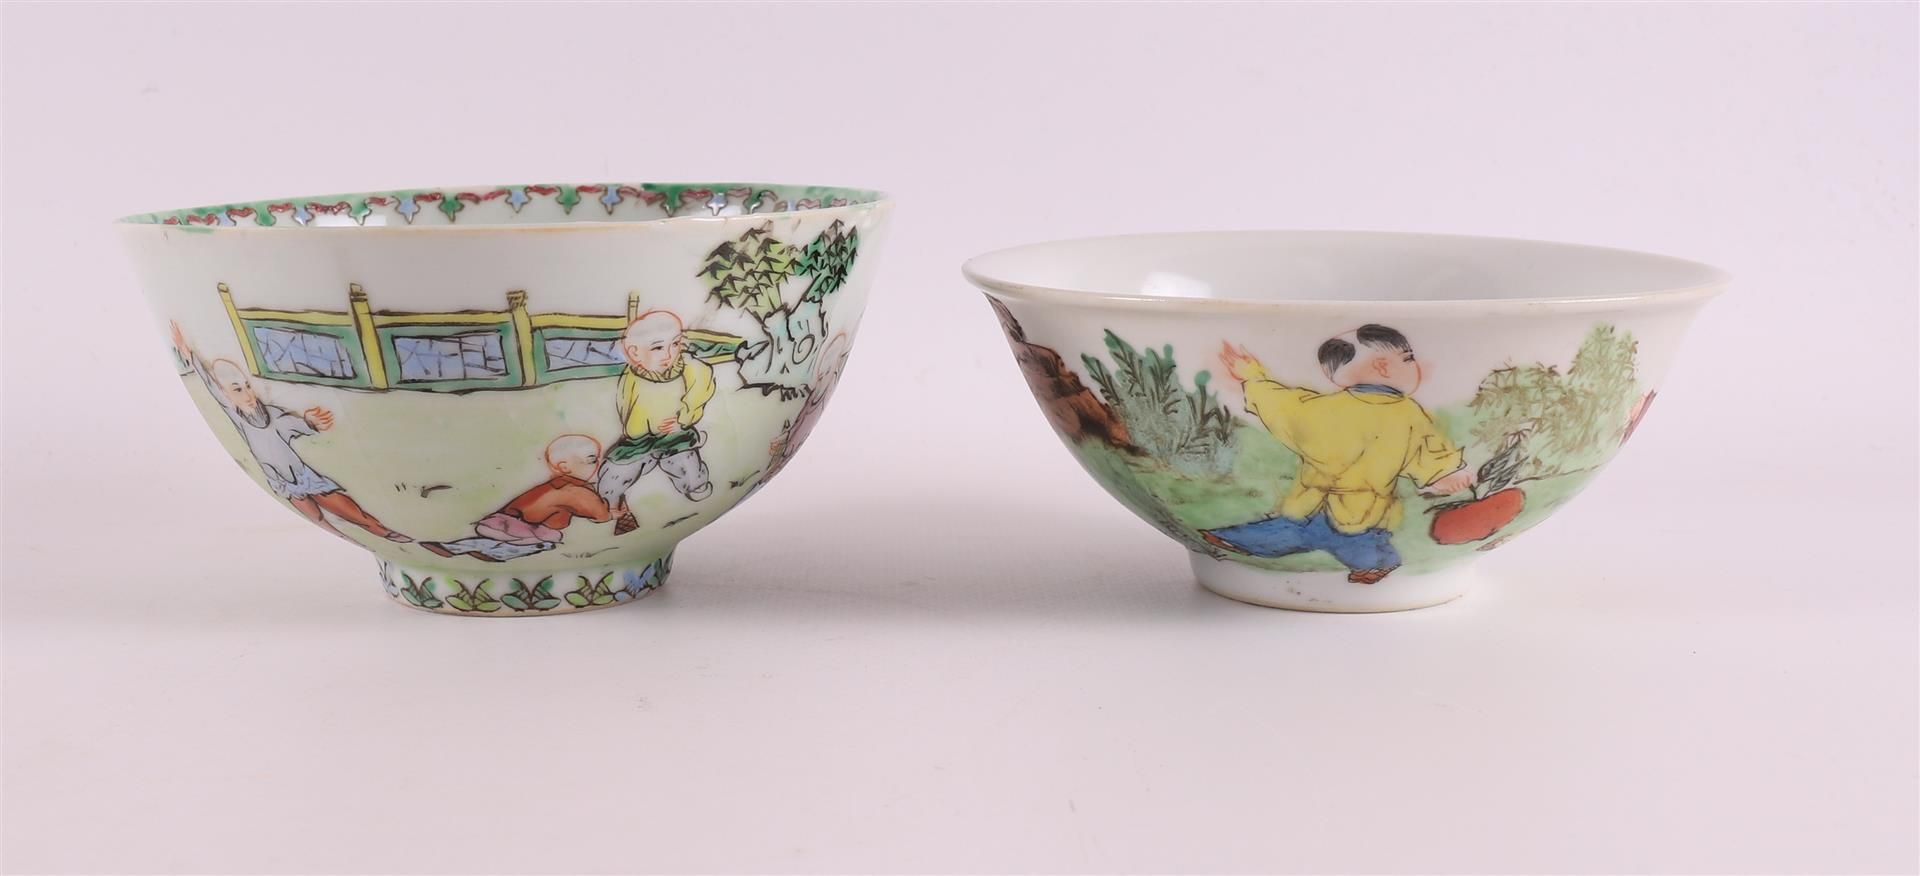 Two porcelain bowls on stand ring, China, 20th century. Polychrome decoration of children playing in